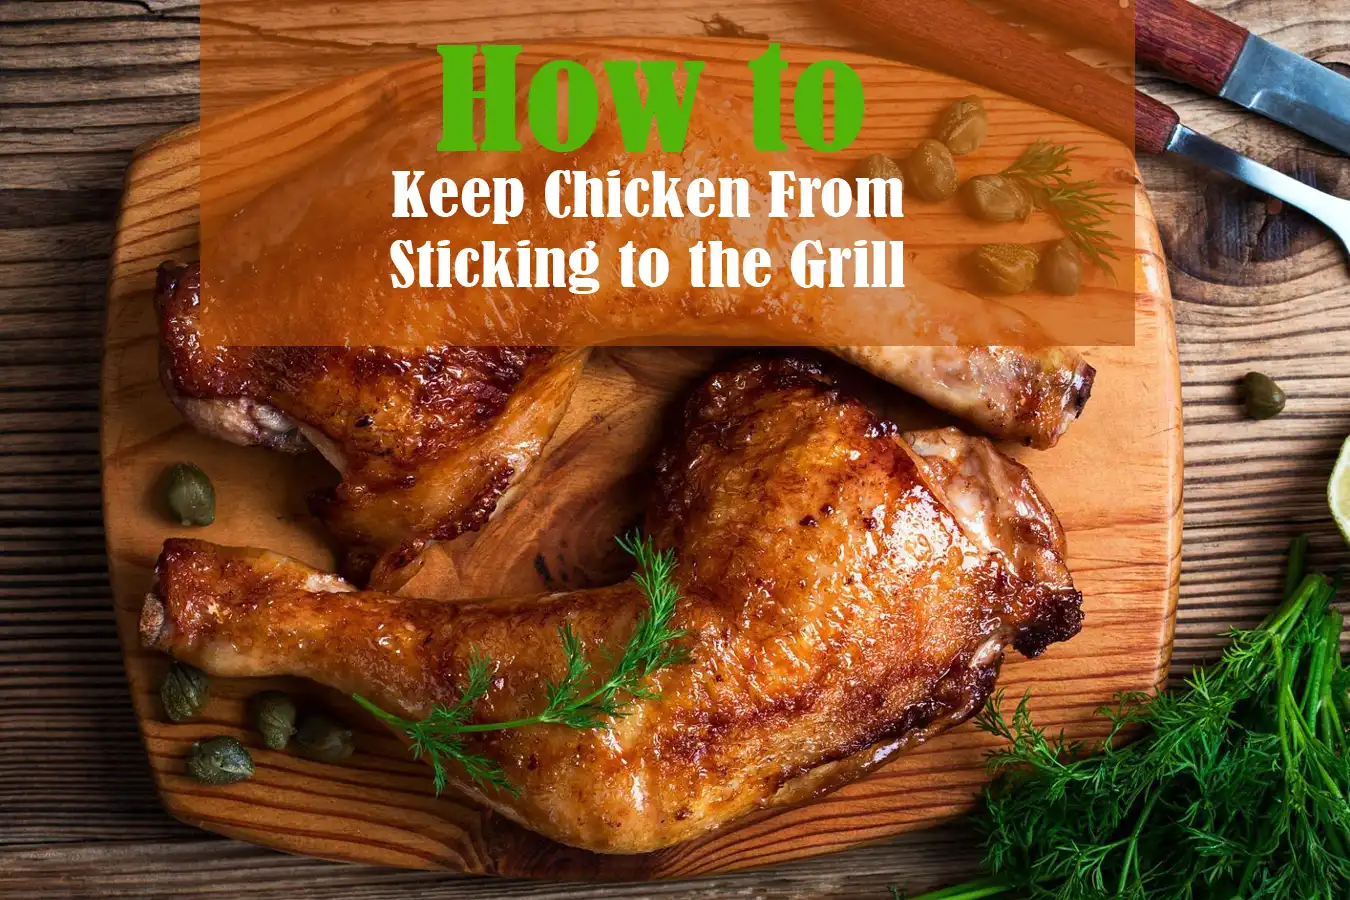 Keep Chicken From Sticking to the Grill